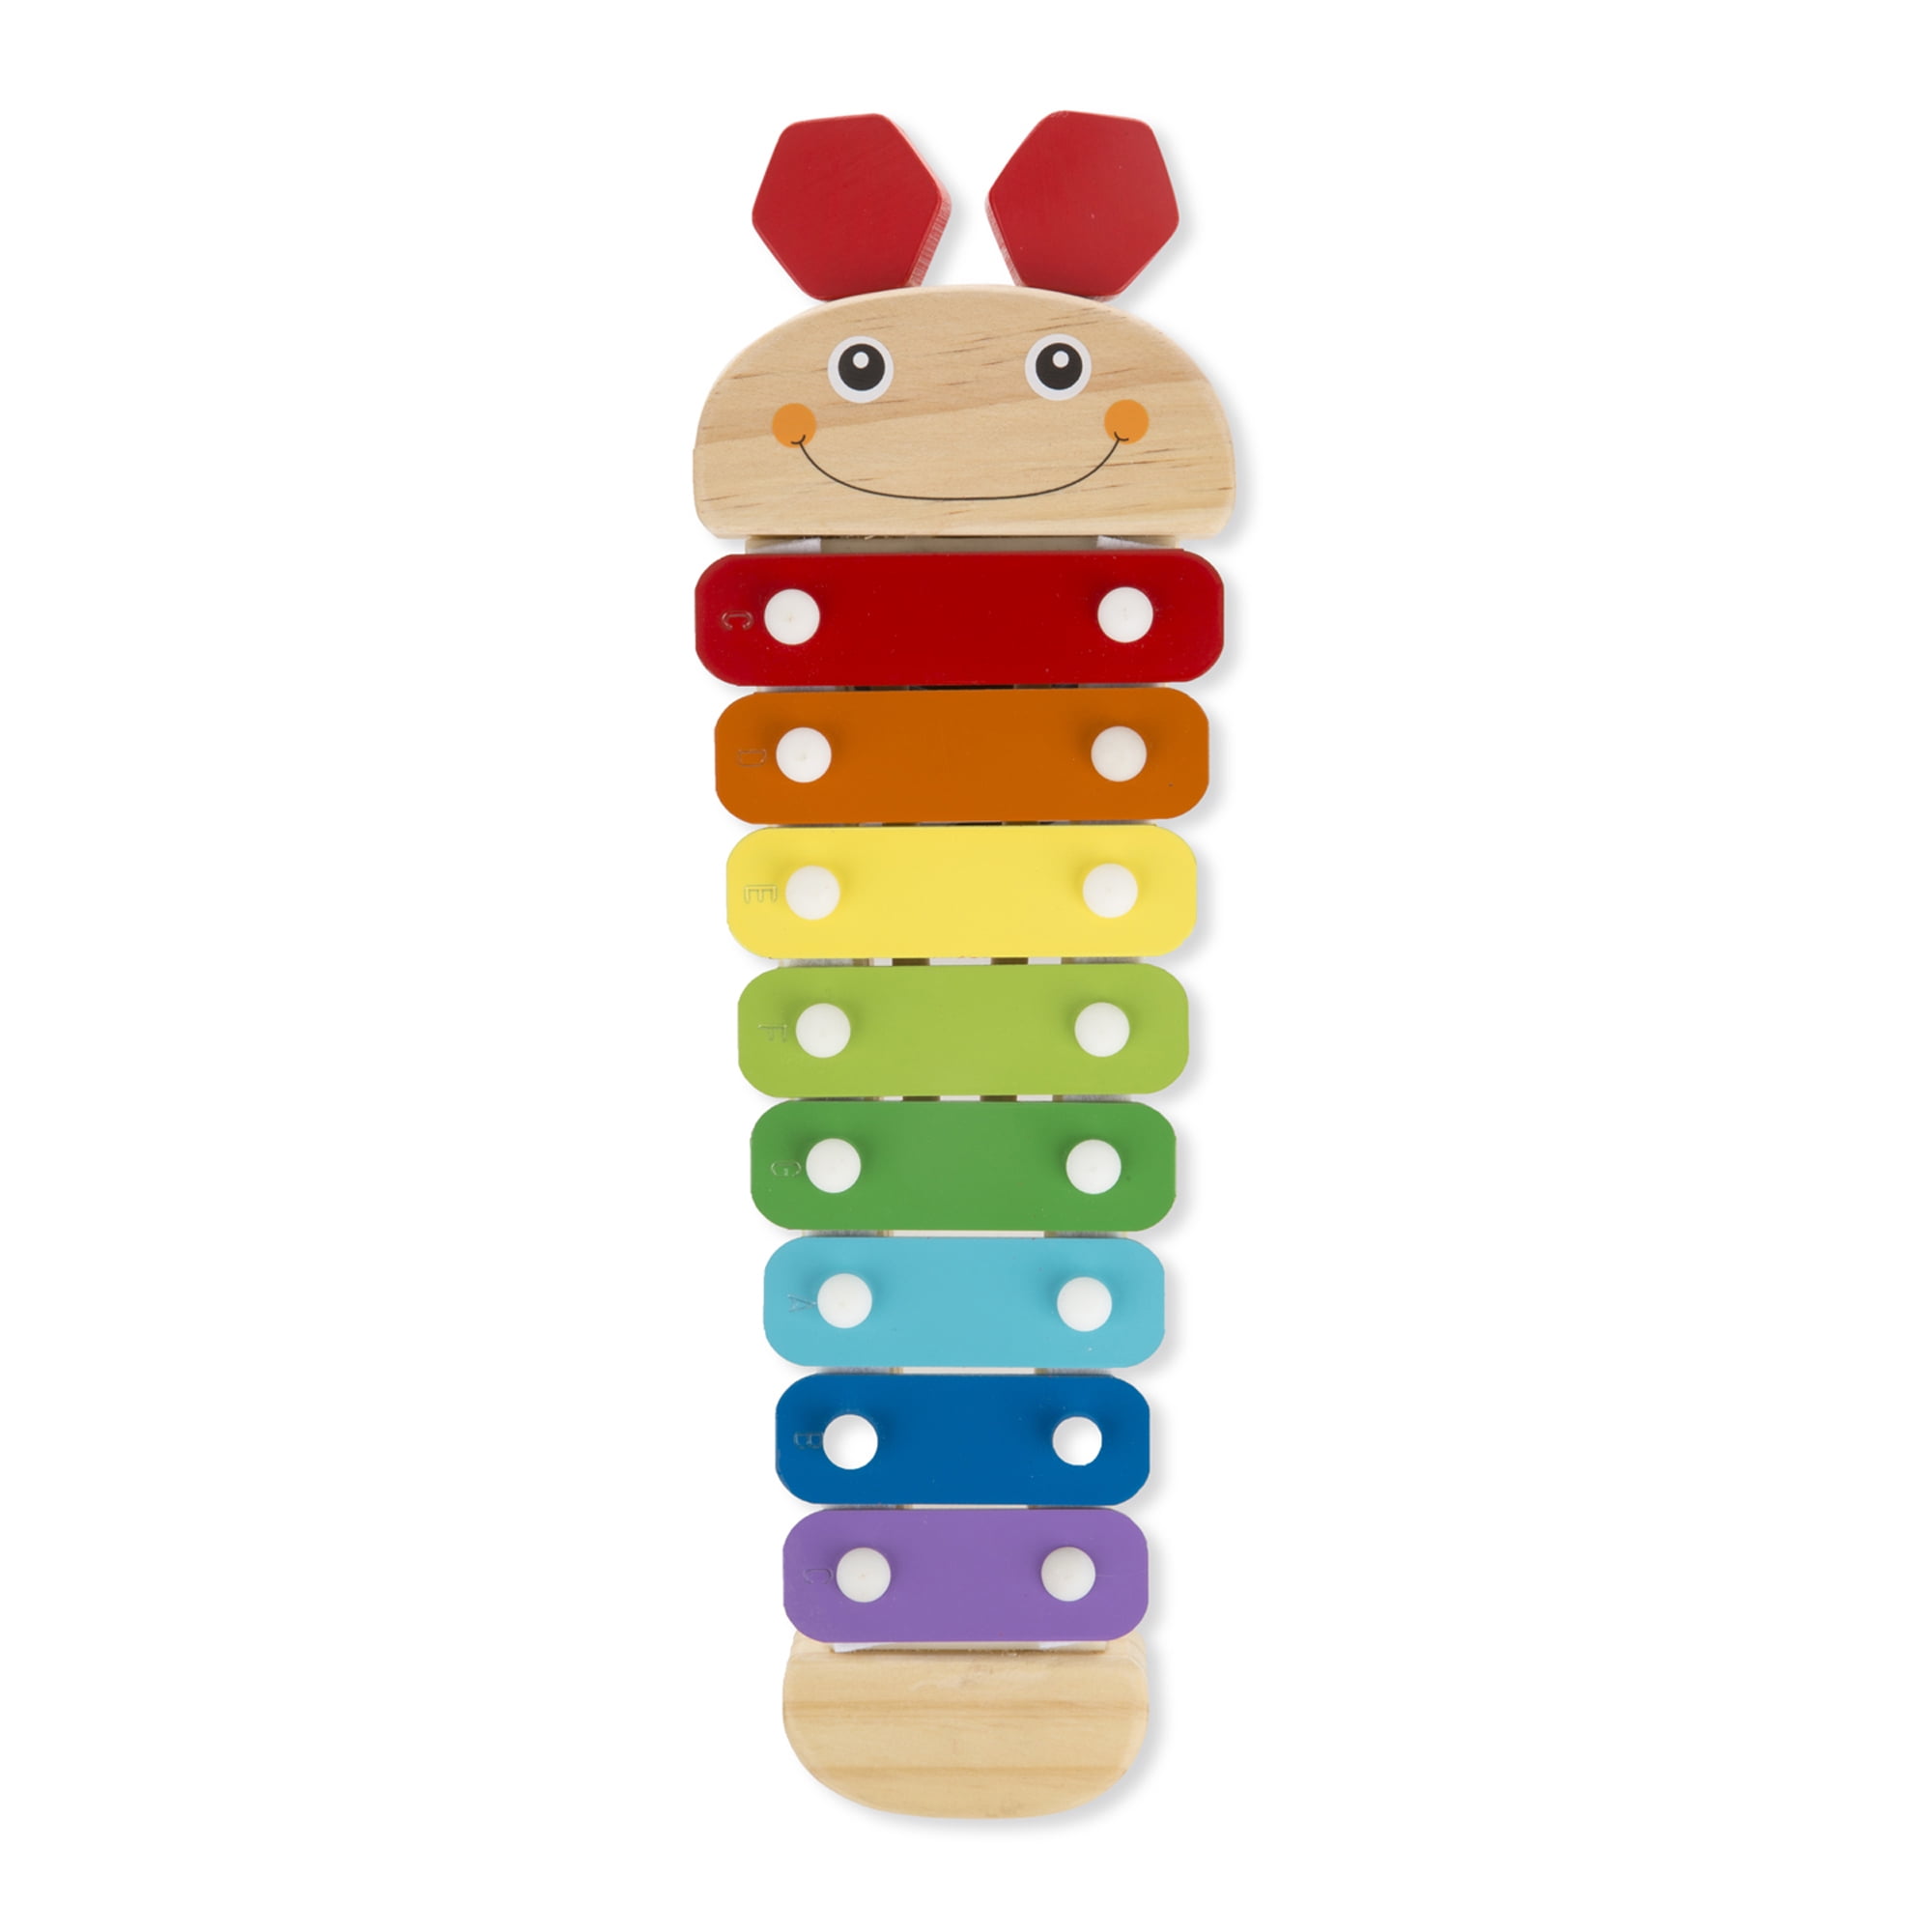 Melissa & Doug Caterpillar Xylophone Musical Toy With Wooden Mallets 8964 for sale online 